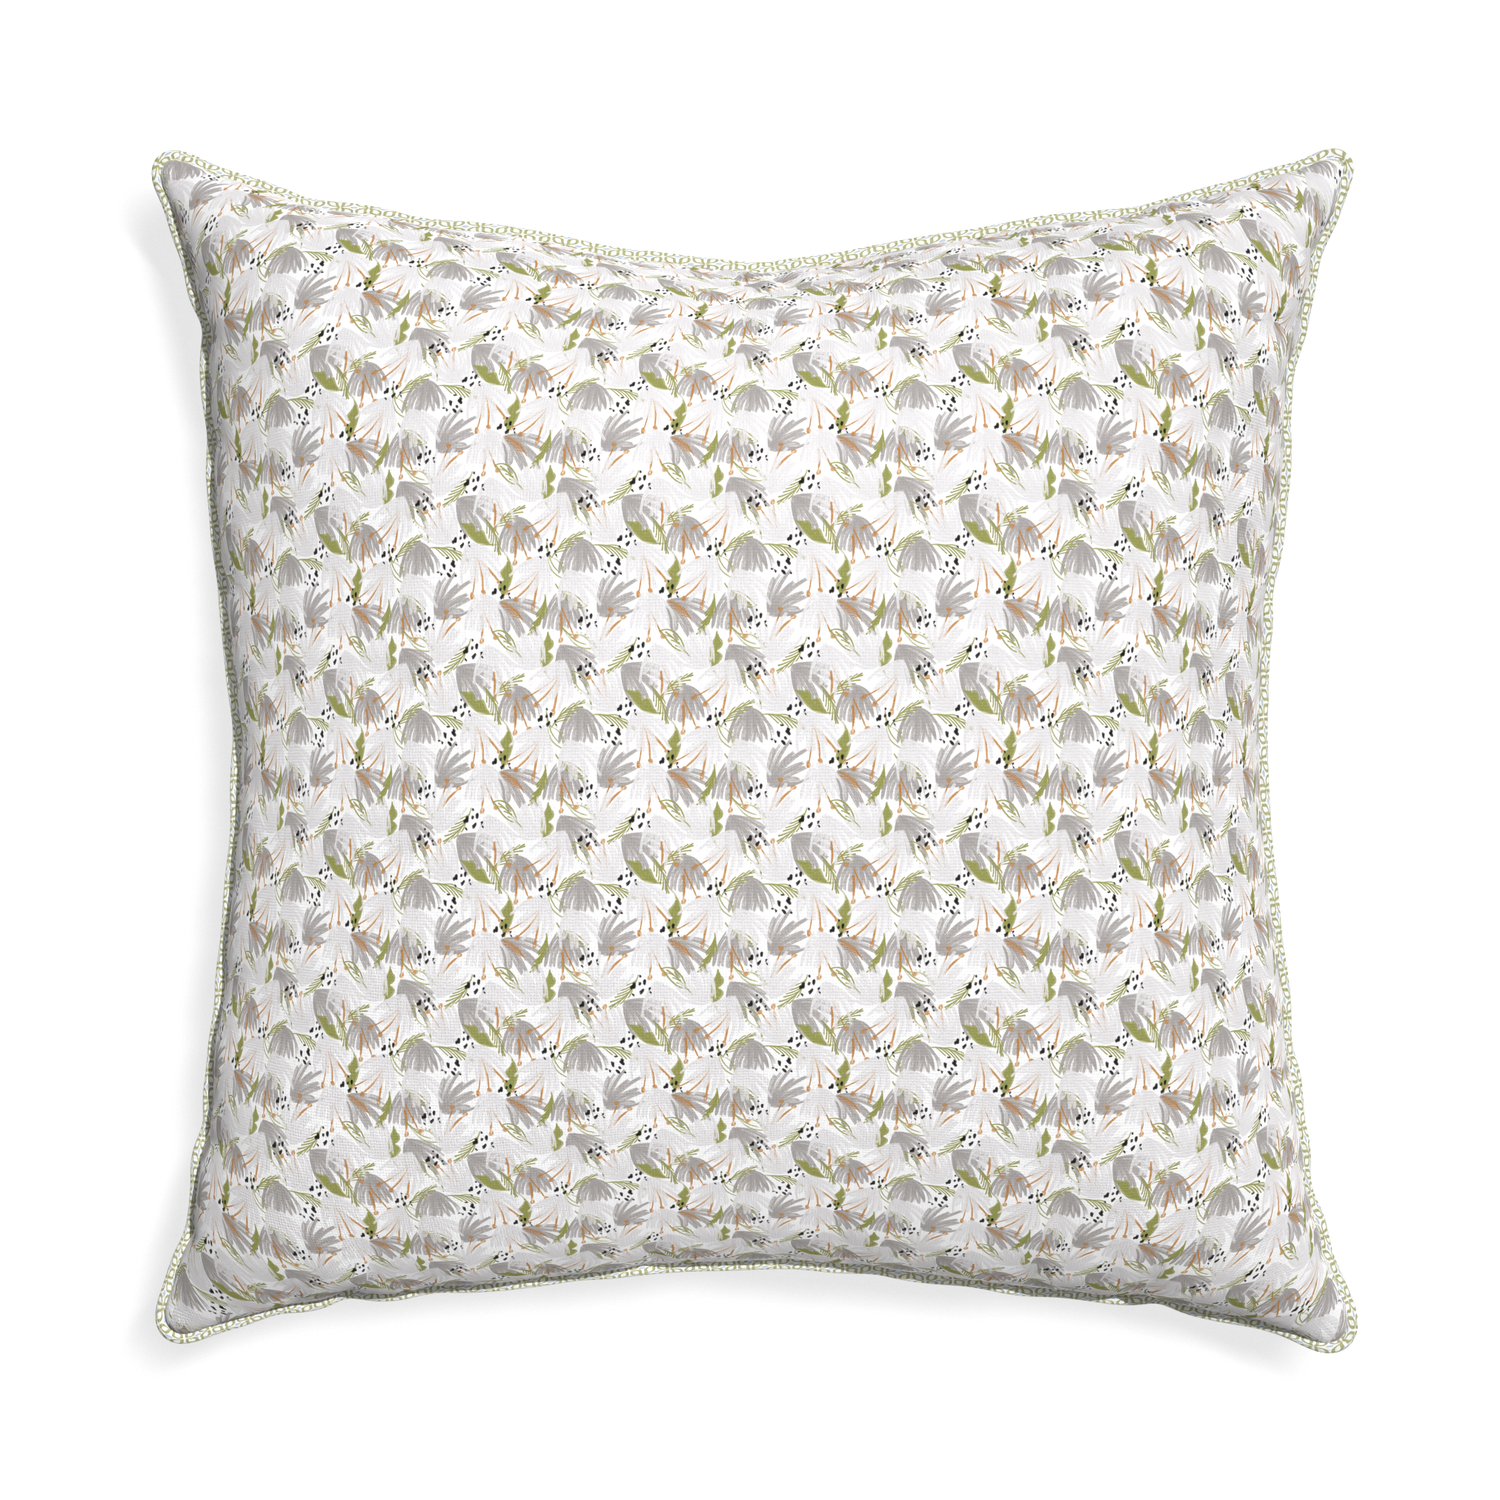 Euro-sham eden grey custom pillow with l piping on white background